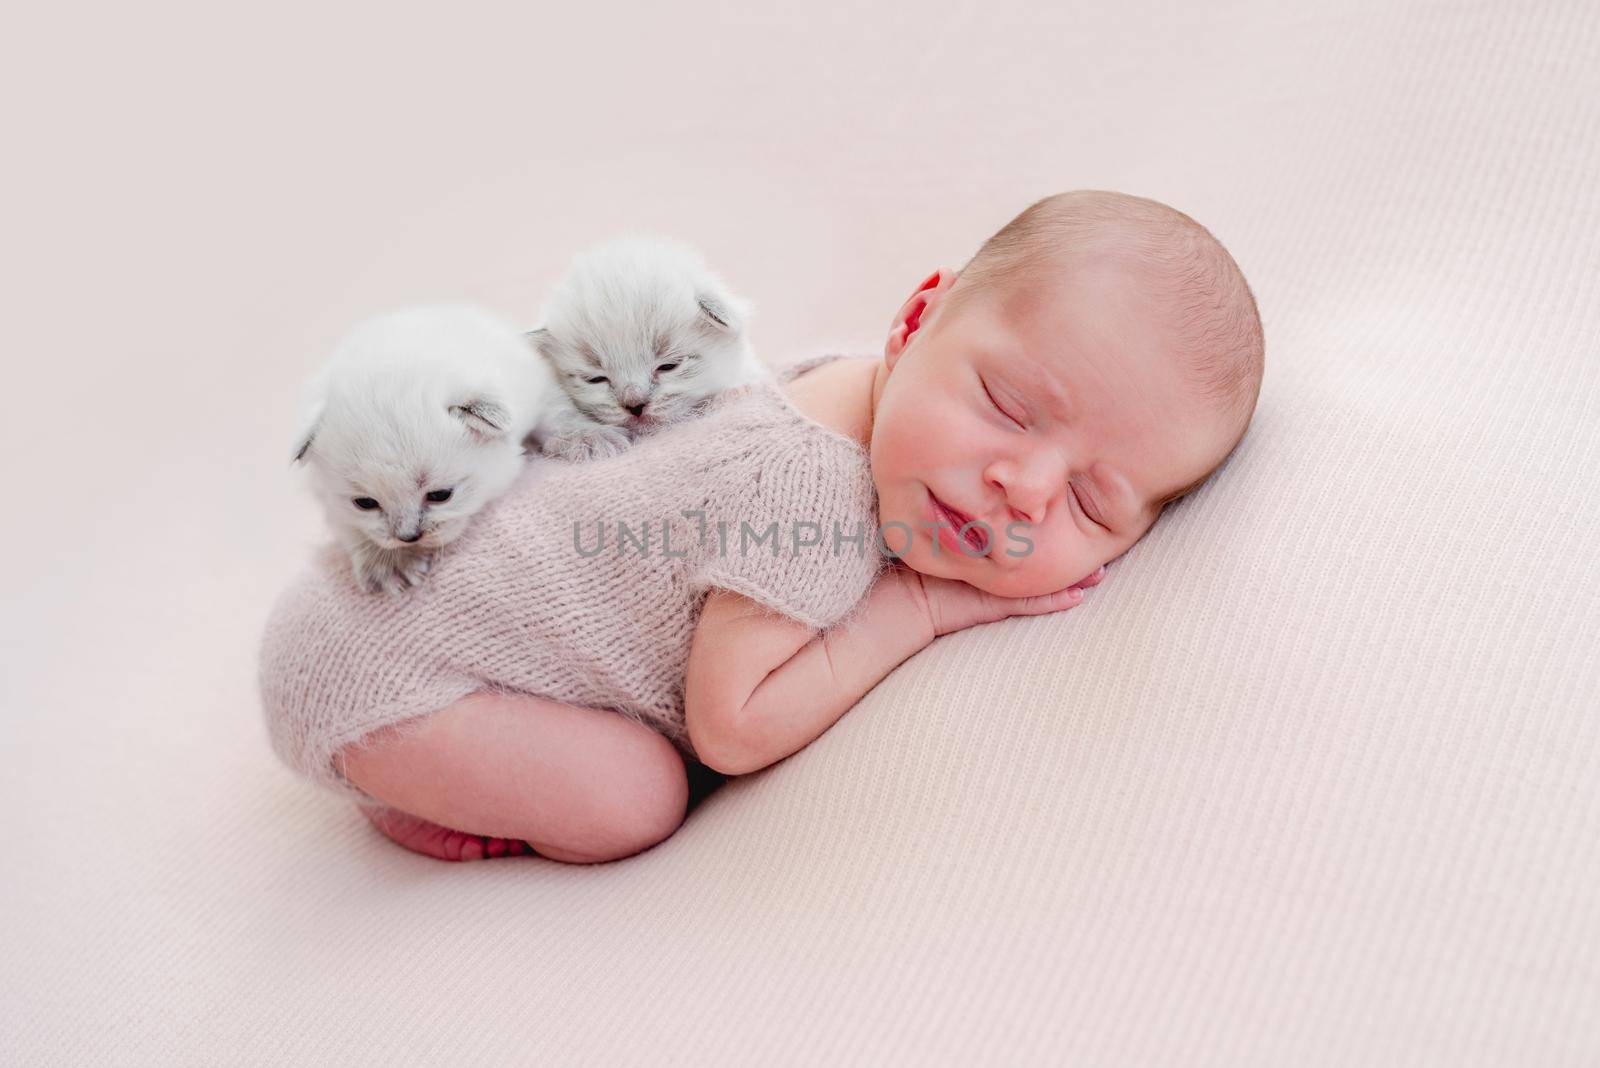 Adorable newborn baby boy sleeping on his tummy and two little fluffy kittens sitting on his back. Cute infant kid napping with small cats during studio photoshoot